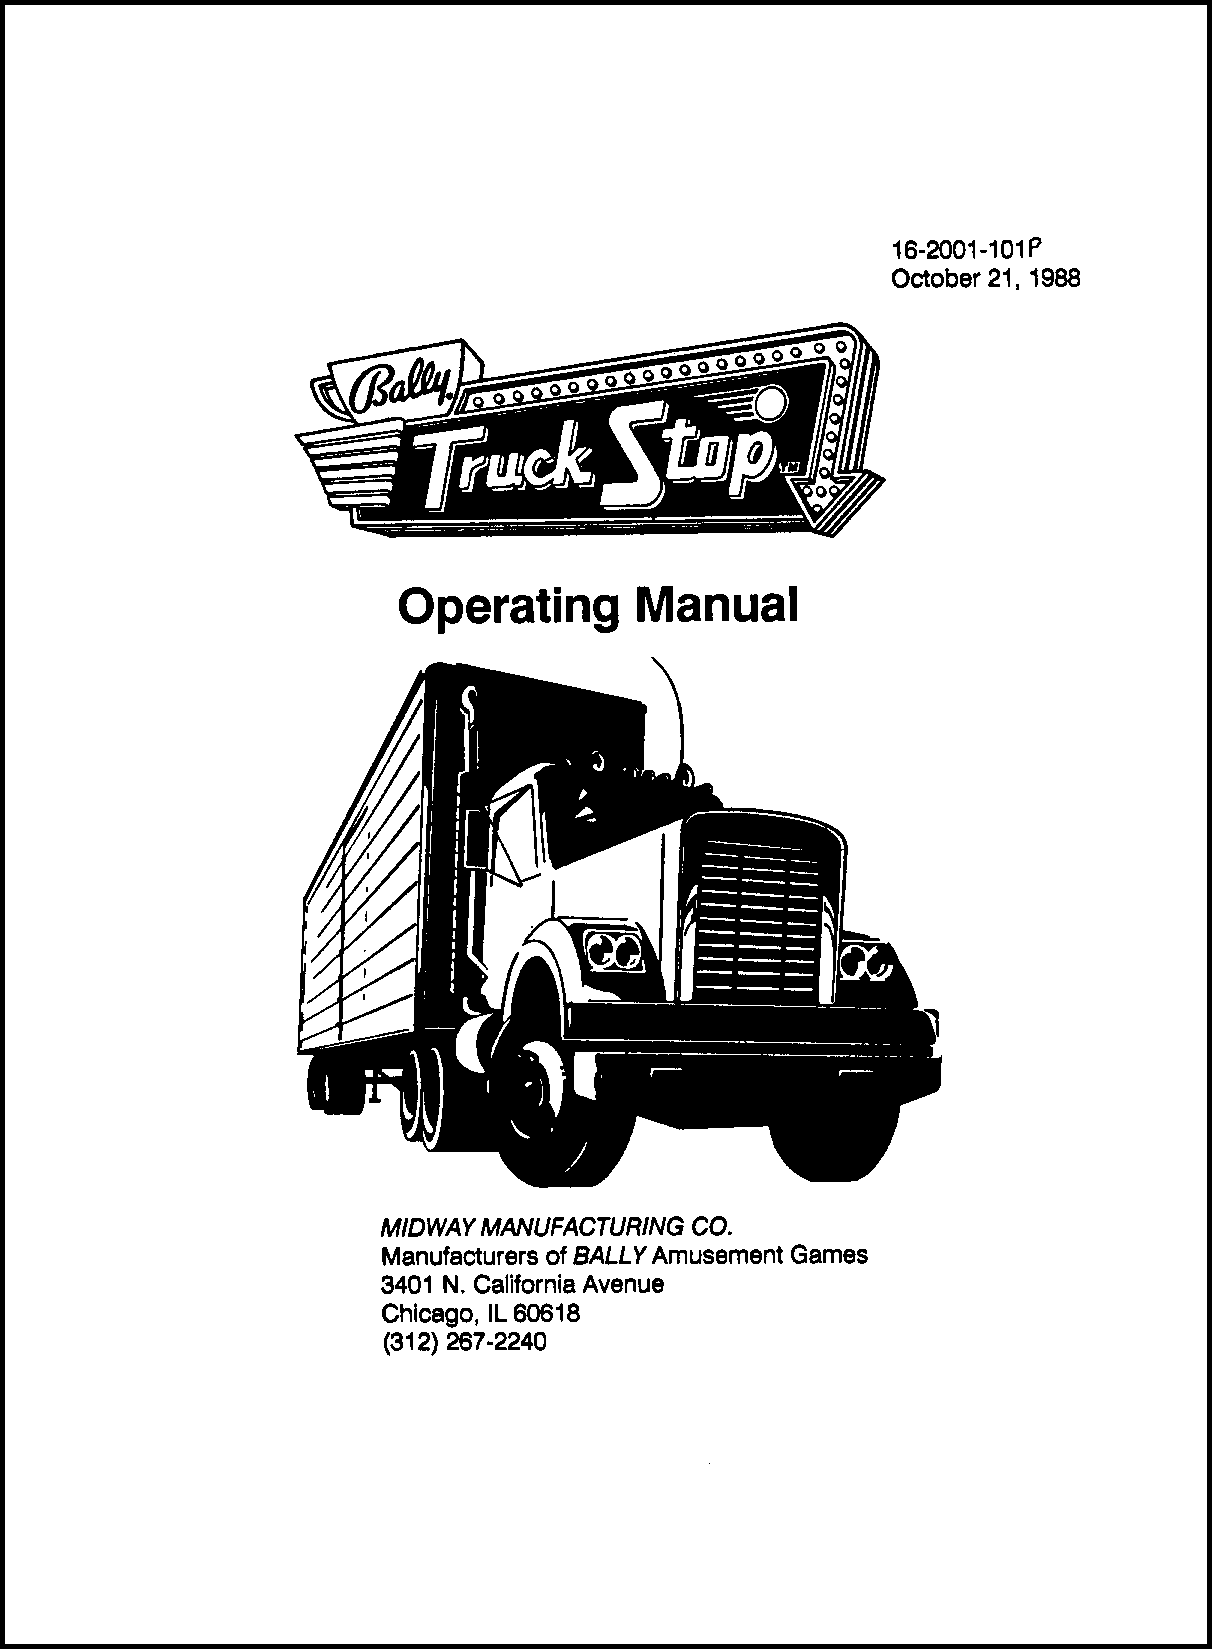 Cover of my 1988 manual for Truck Stop, first Bally game after Williams bought Bally